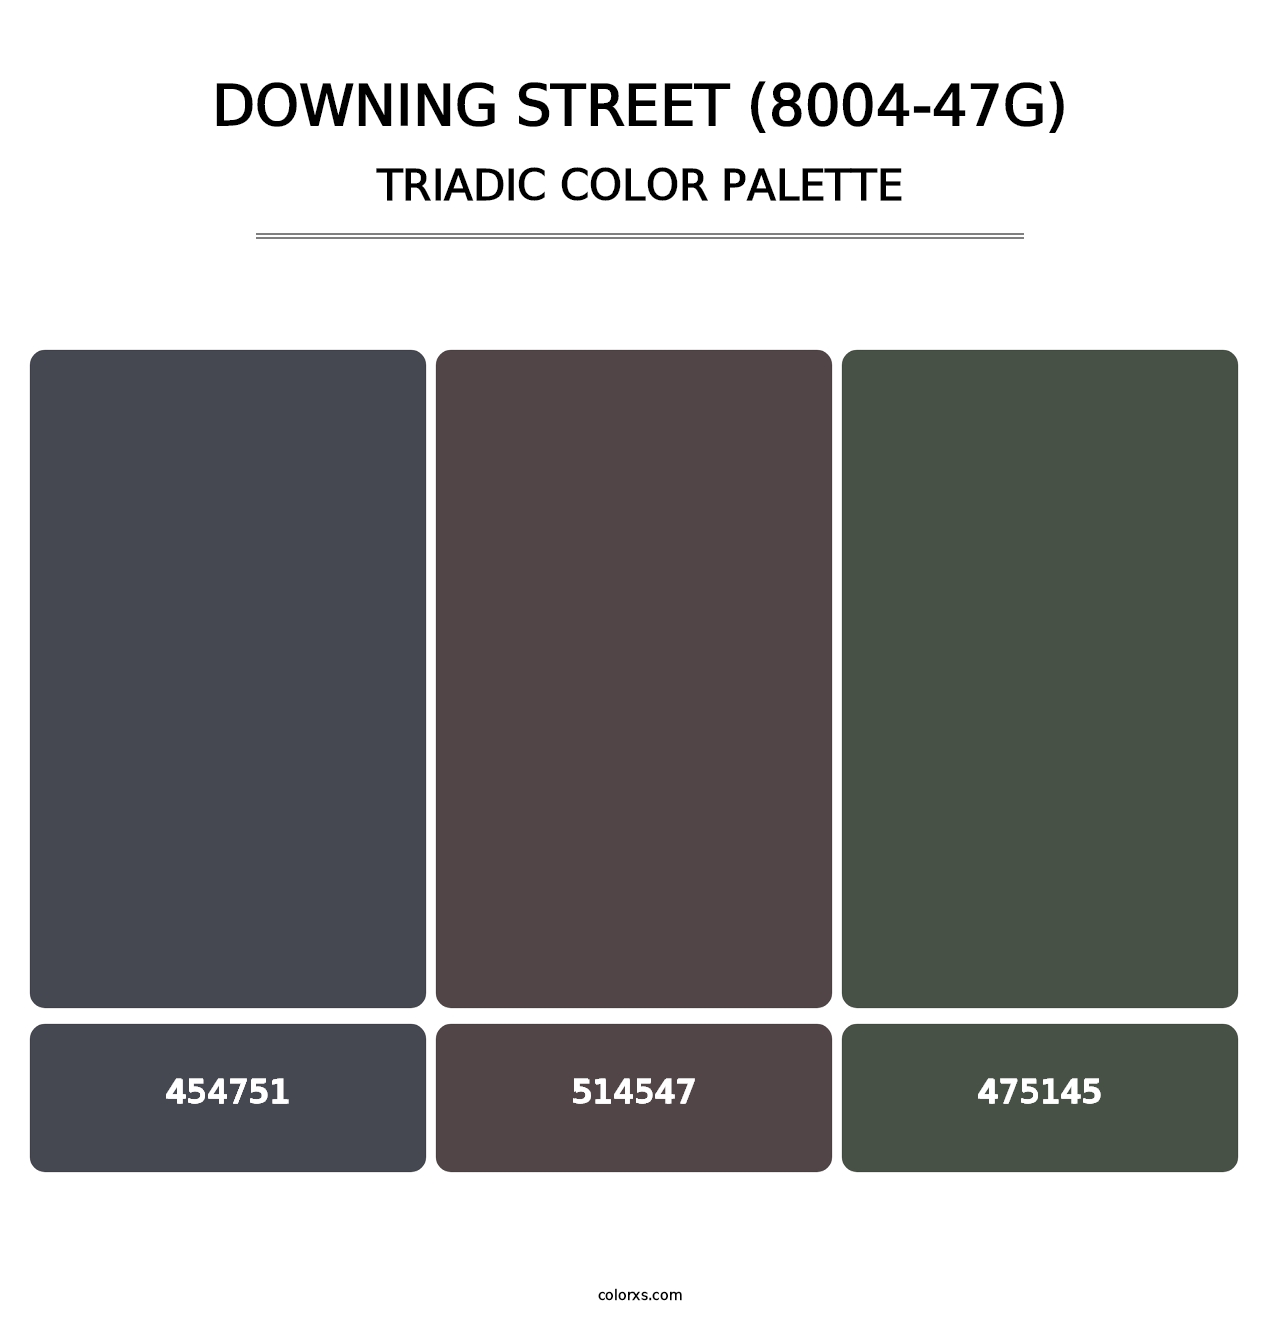 Downing Street (8004-47G) - Triadic Color Palette